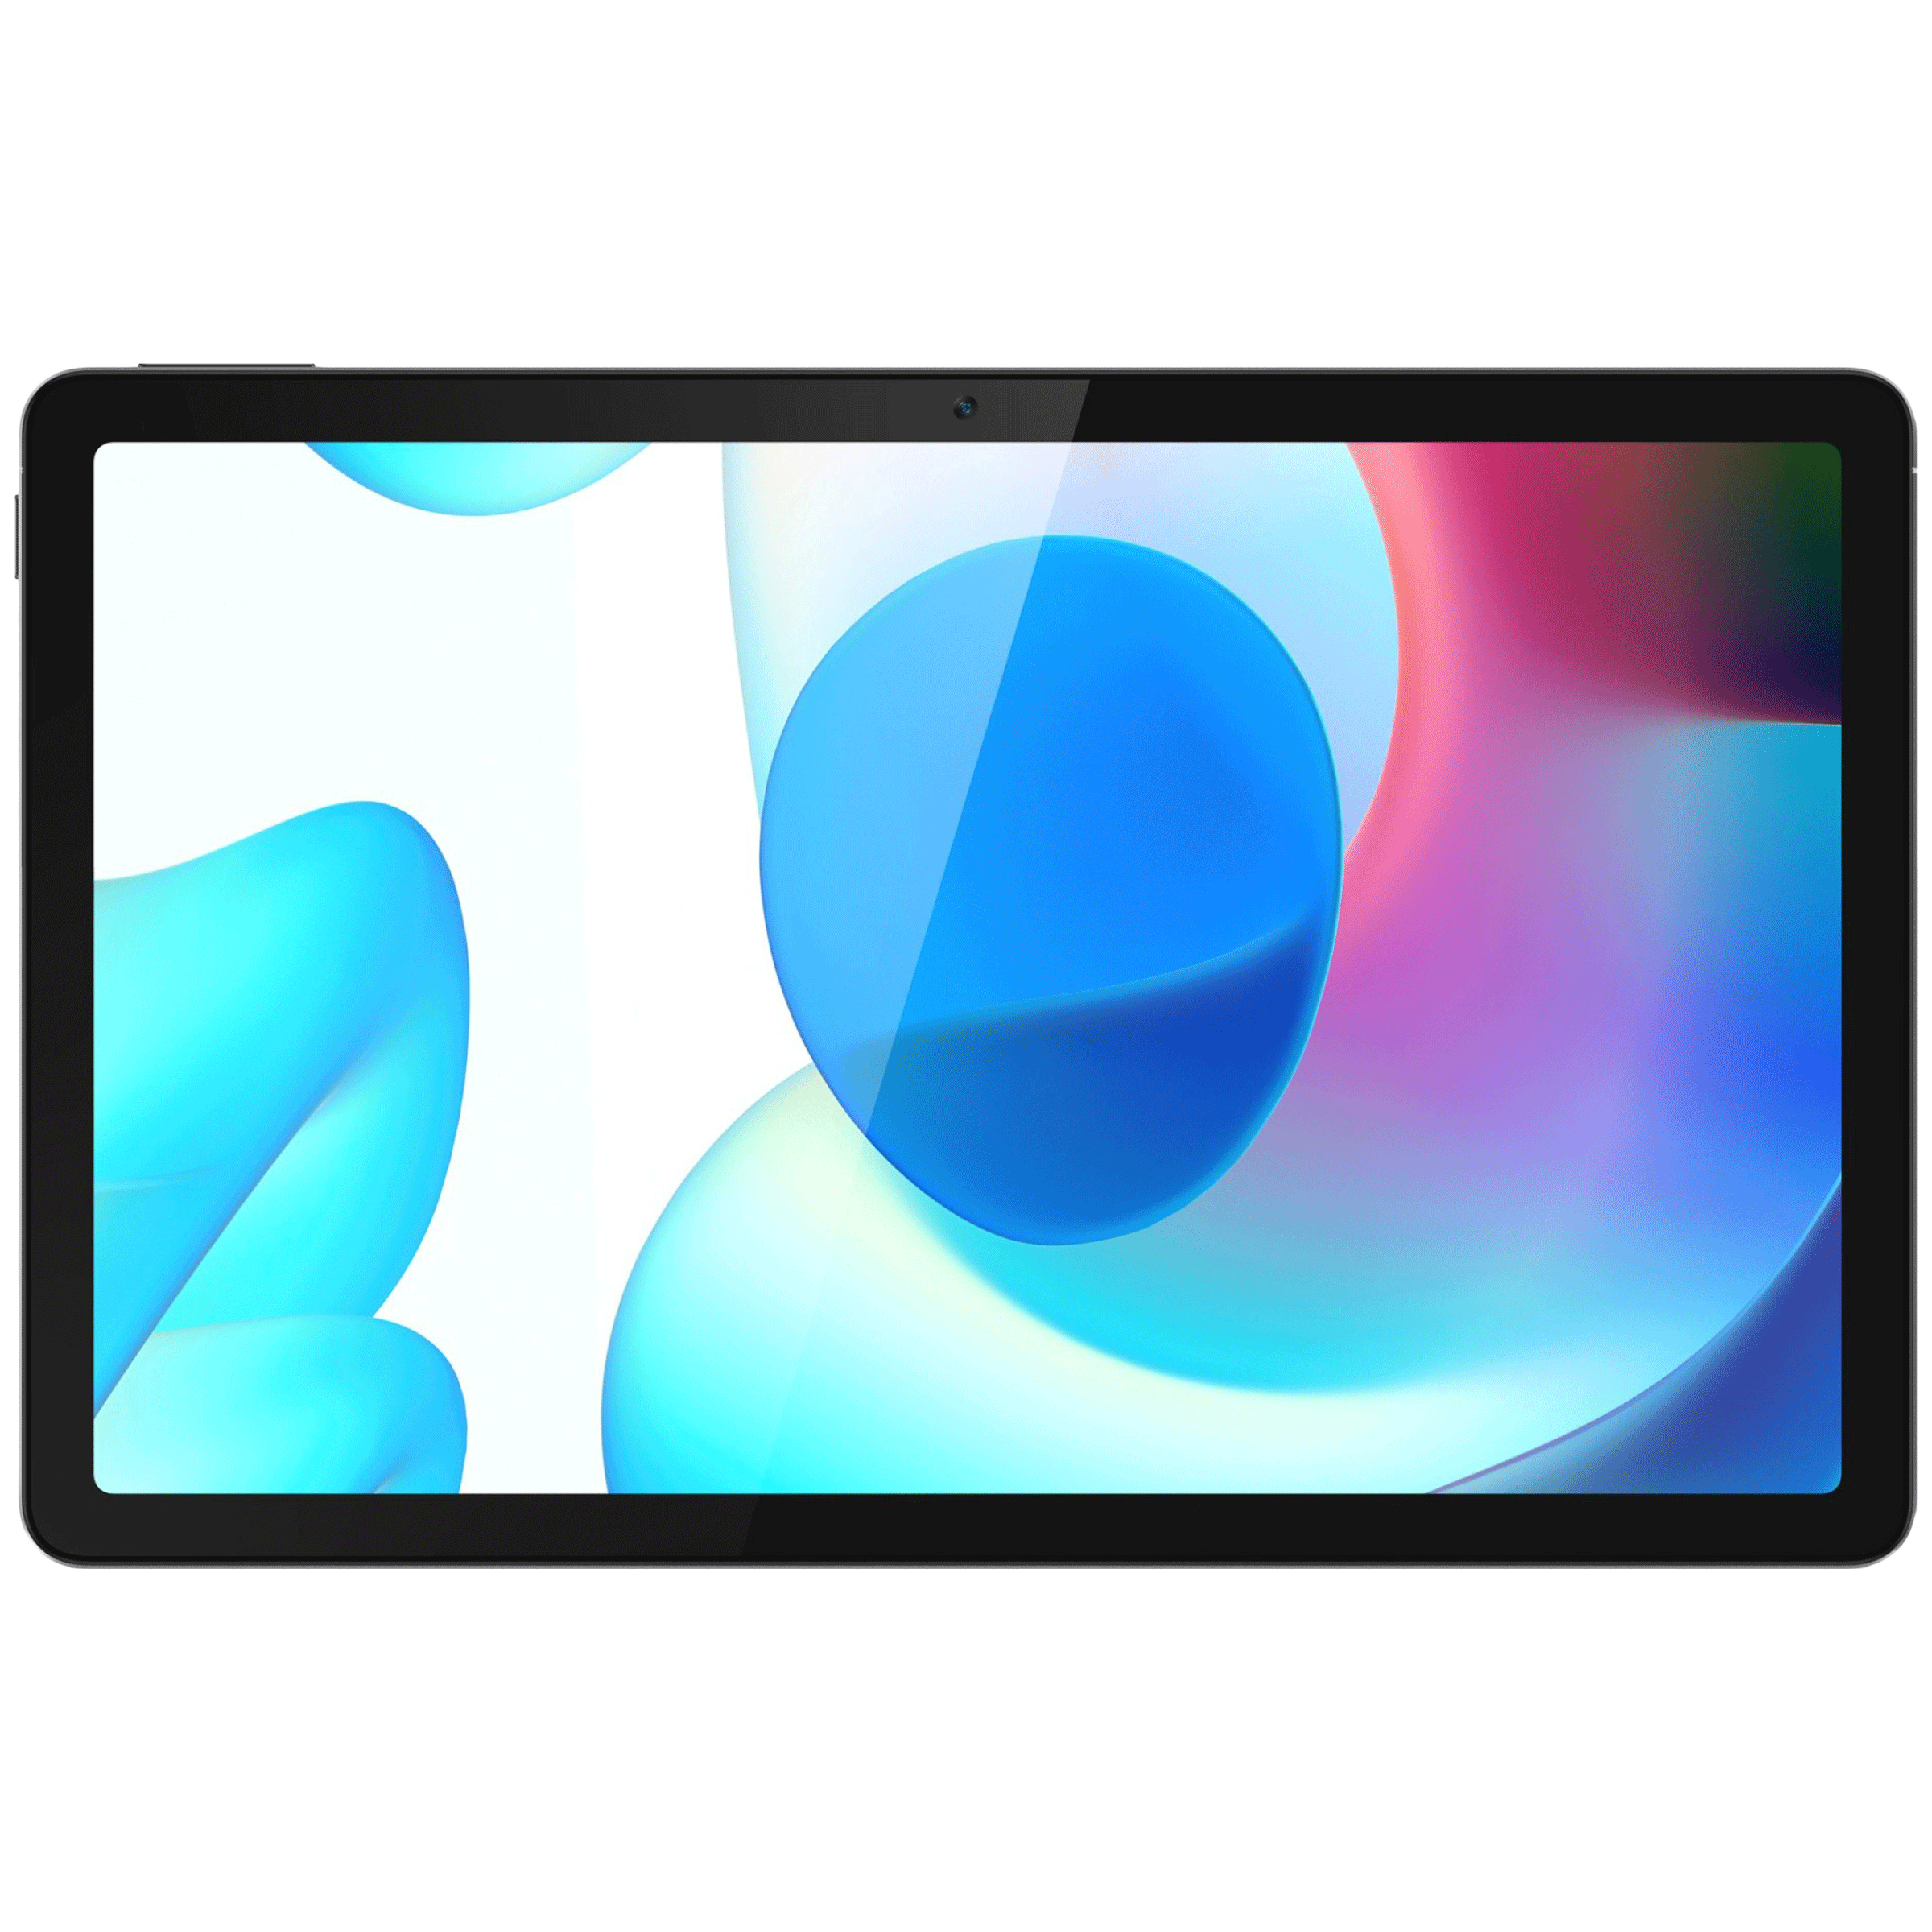 Realme Pad WiFi Android Tablet (Android 11, MediaTek, Helio G80, 26.42cm (10.4 Inches), 3GB RAM, 32GB ROM, RMP2103, Grey)_1